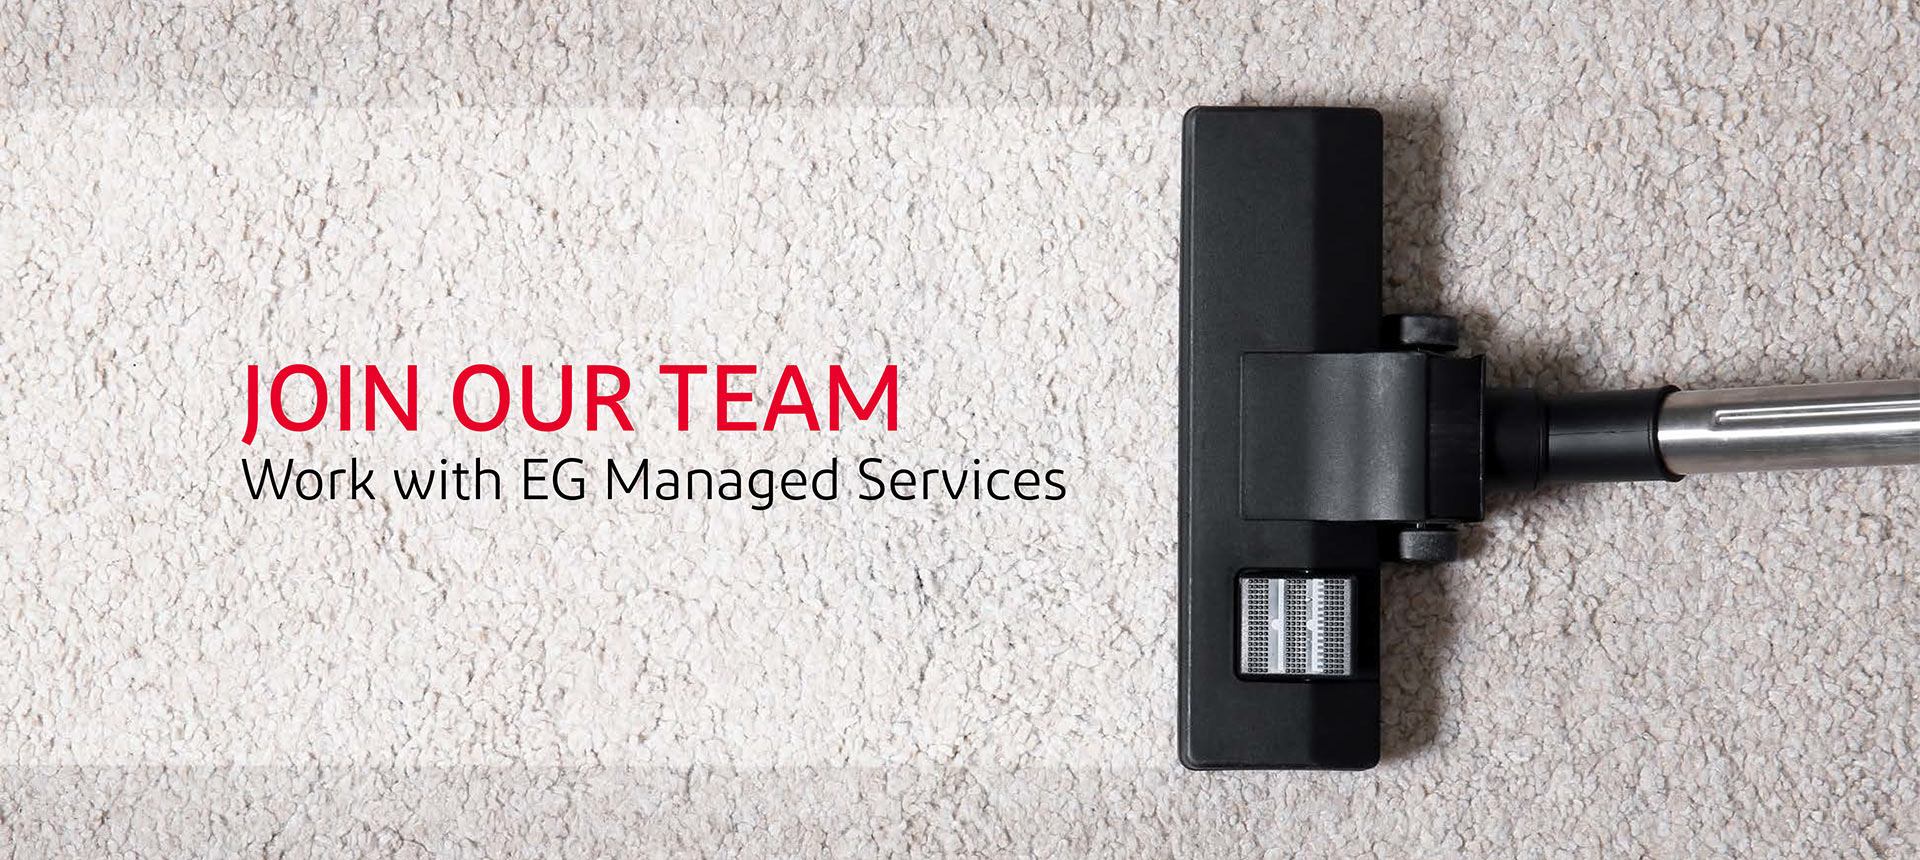 Join Our Team. Work with EG Managed Services.